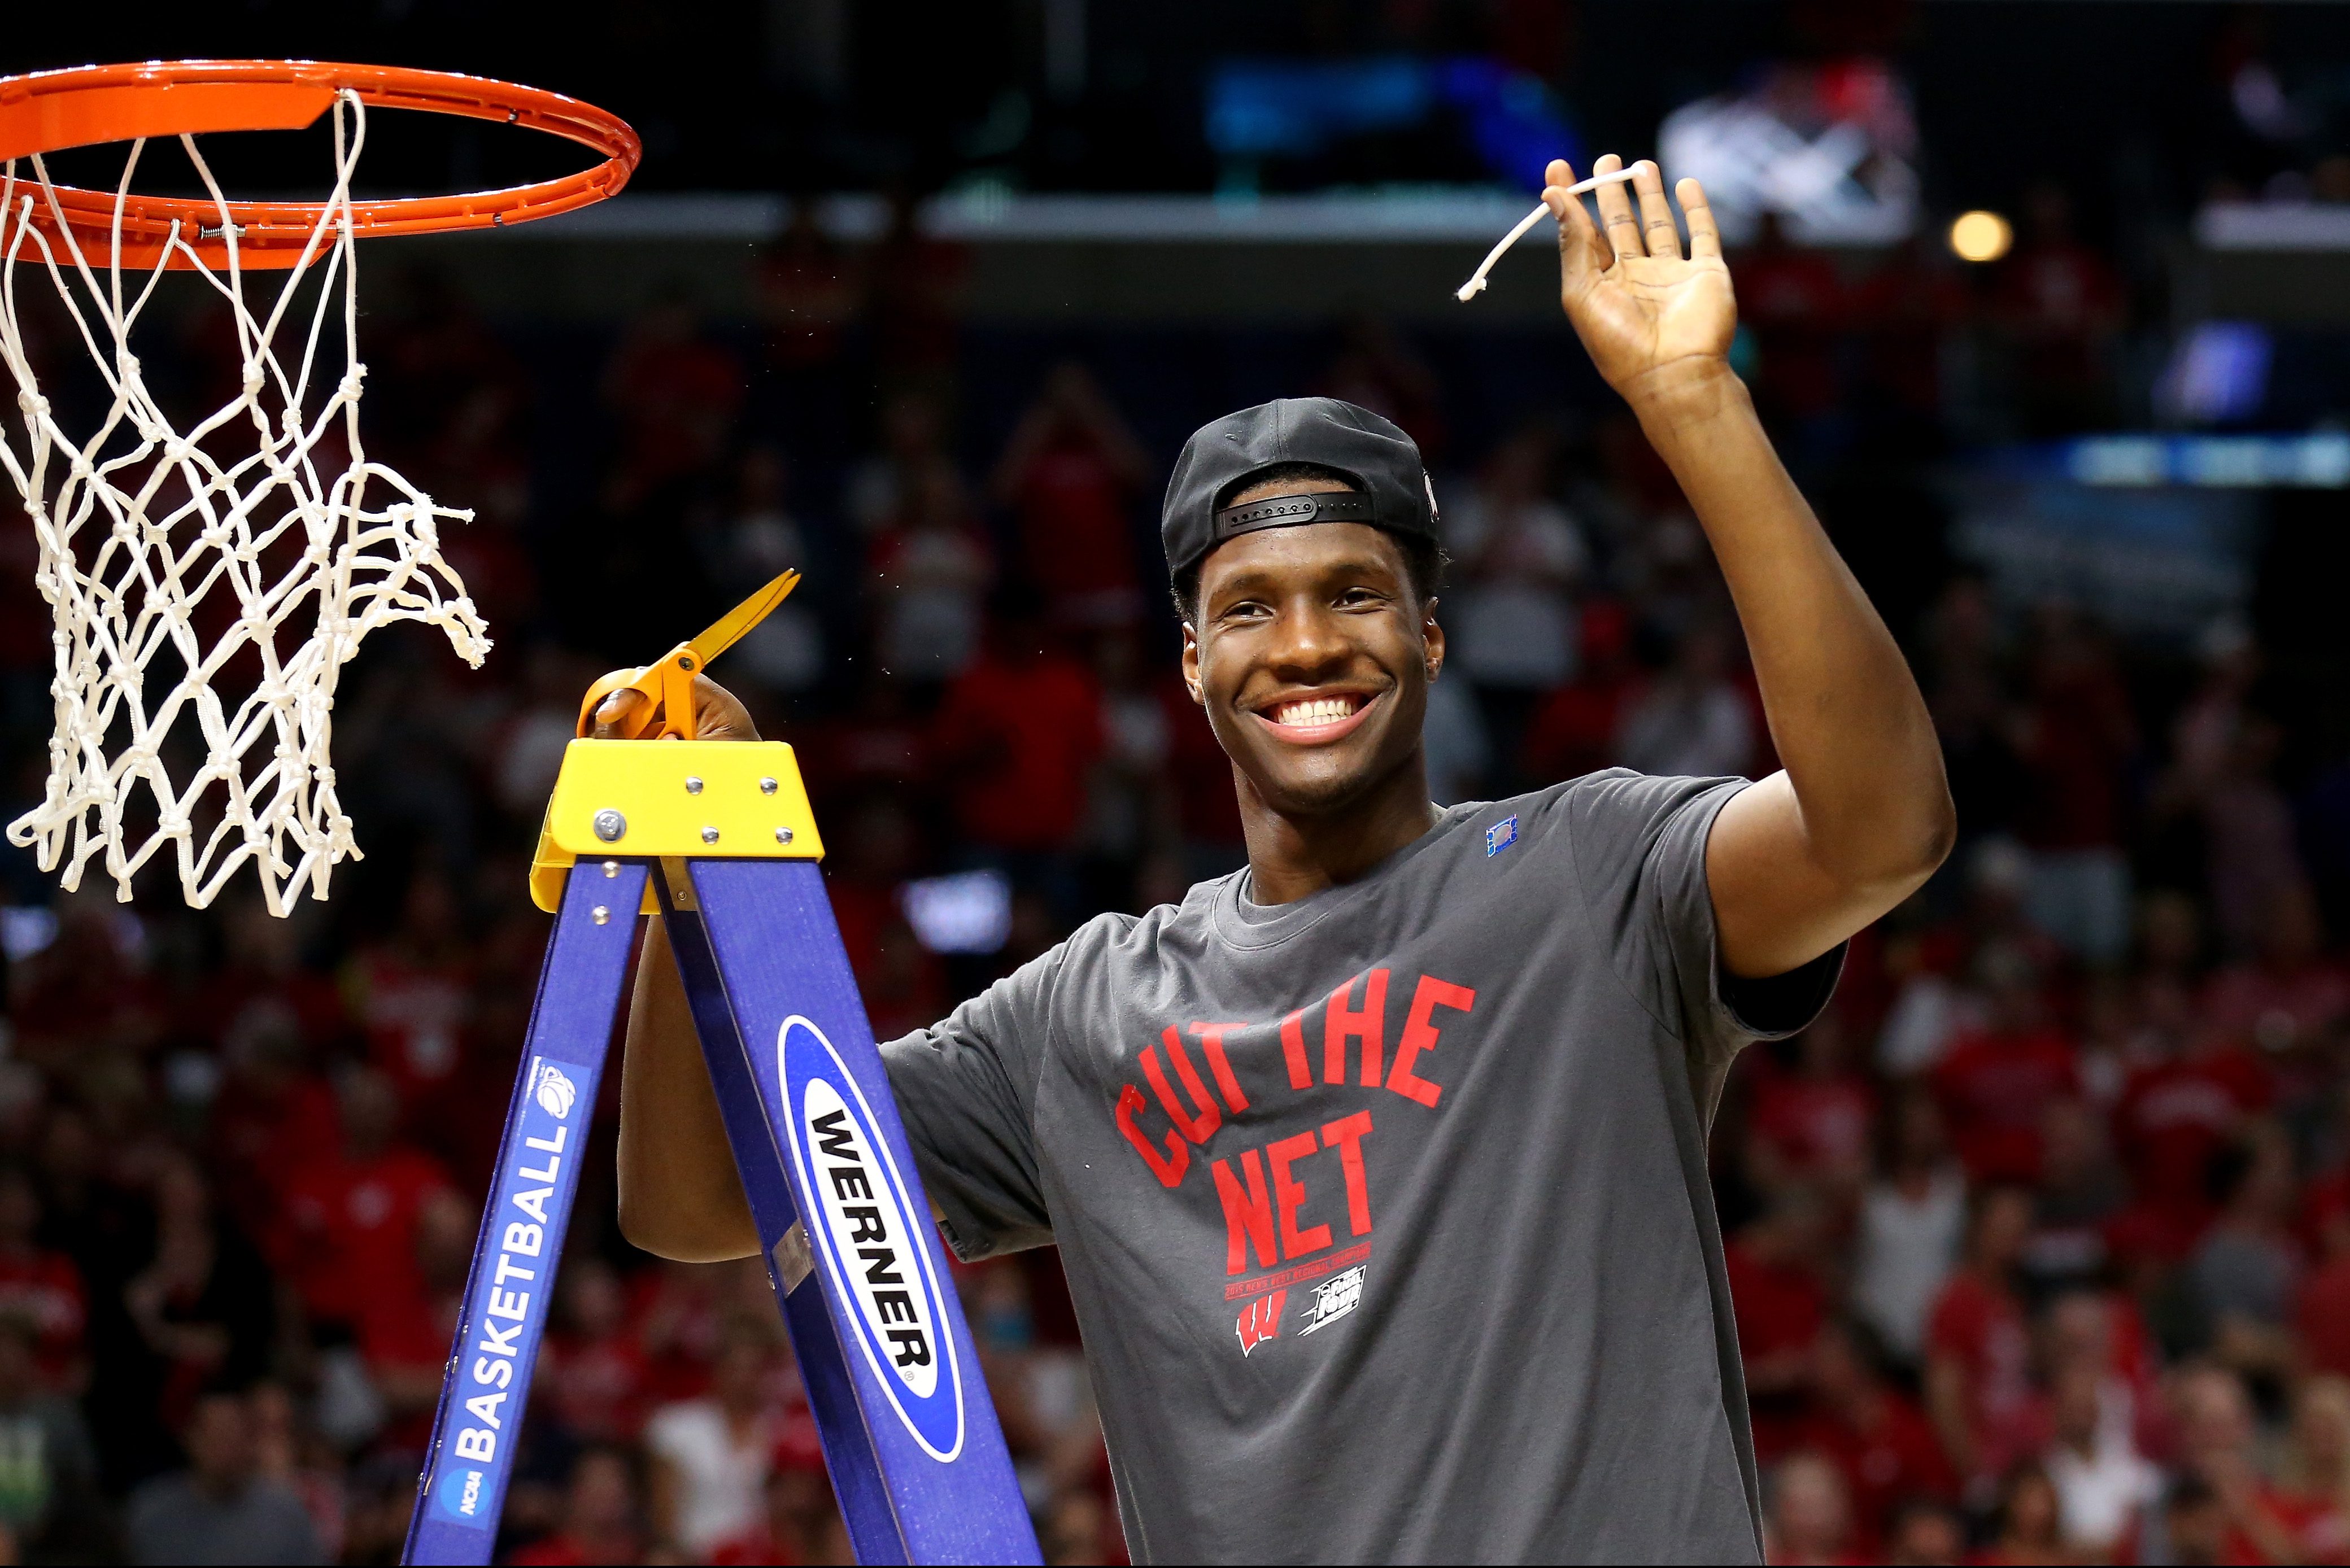 LOS ANGELES, CA - MARCH 28: Nigel Hayes #10 of the Wisconsin Badgers cuts the net after the Badgers 85-78 victory against the Arizona Wildcats during the West Regional Final of the 2015 NCAA Men's Basketball Tournament at Staples Center on March 28, 2015 in Los Angeles, California. (Photo by Stephen Dunn/Getty Images)